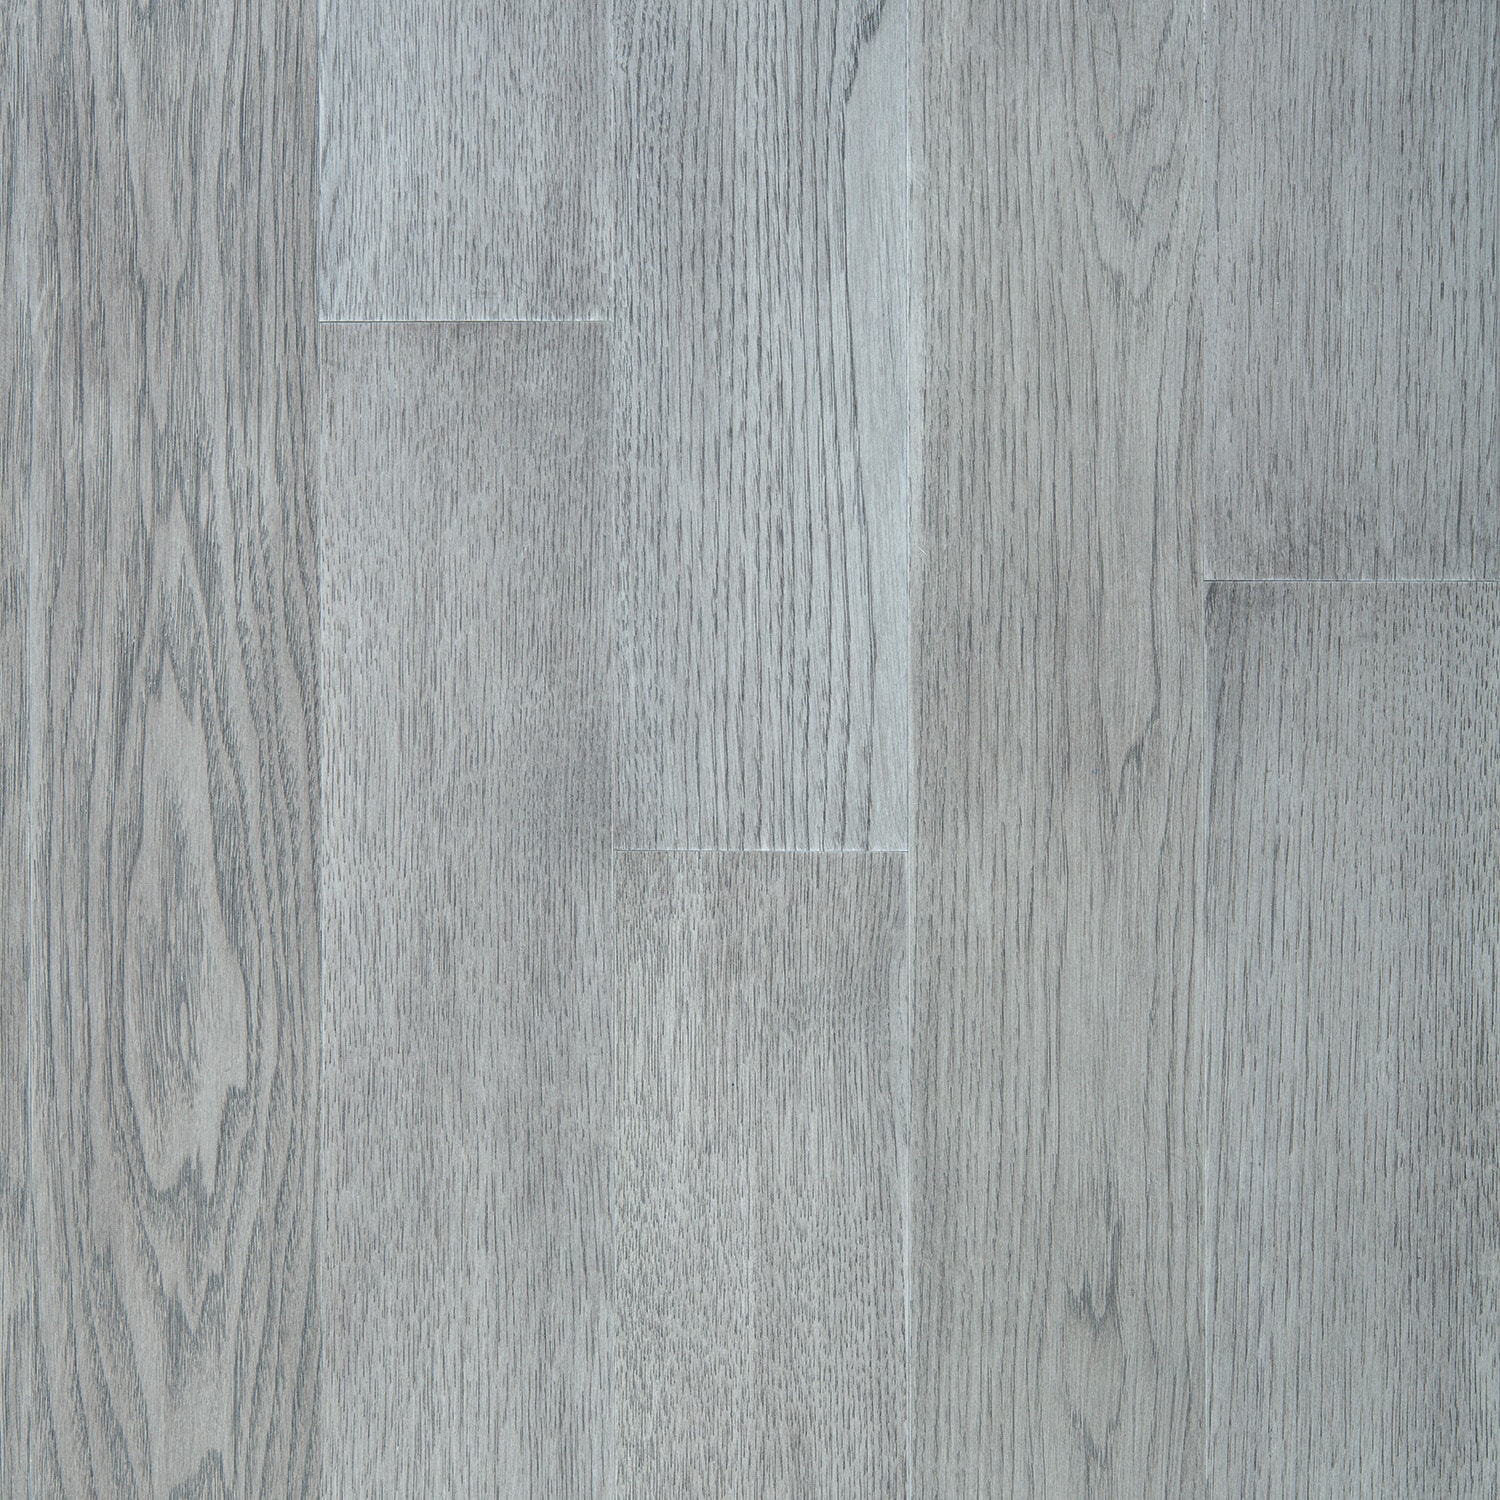 Silverthorn Hickory 5-in W x 3/8-in T Wirebrushed Engineered Hardwood Flooring (36.09-sq ft) in Gray | - allen + roth 19LY020